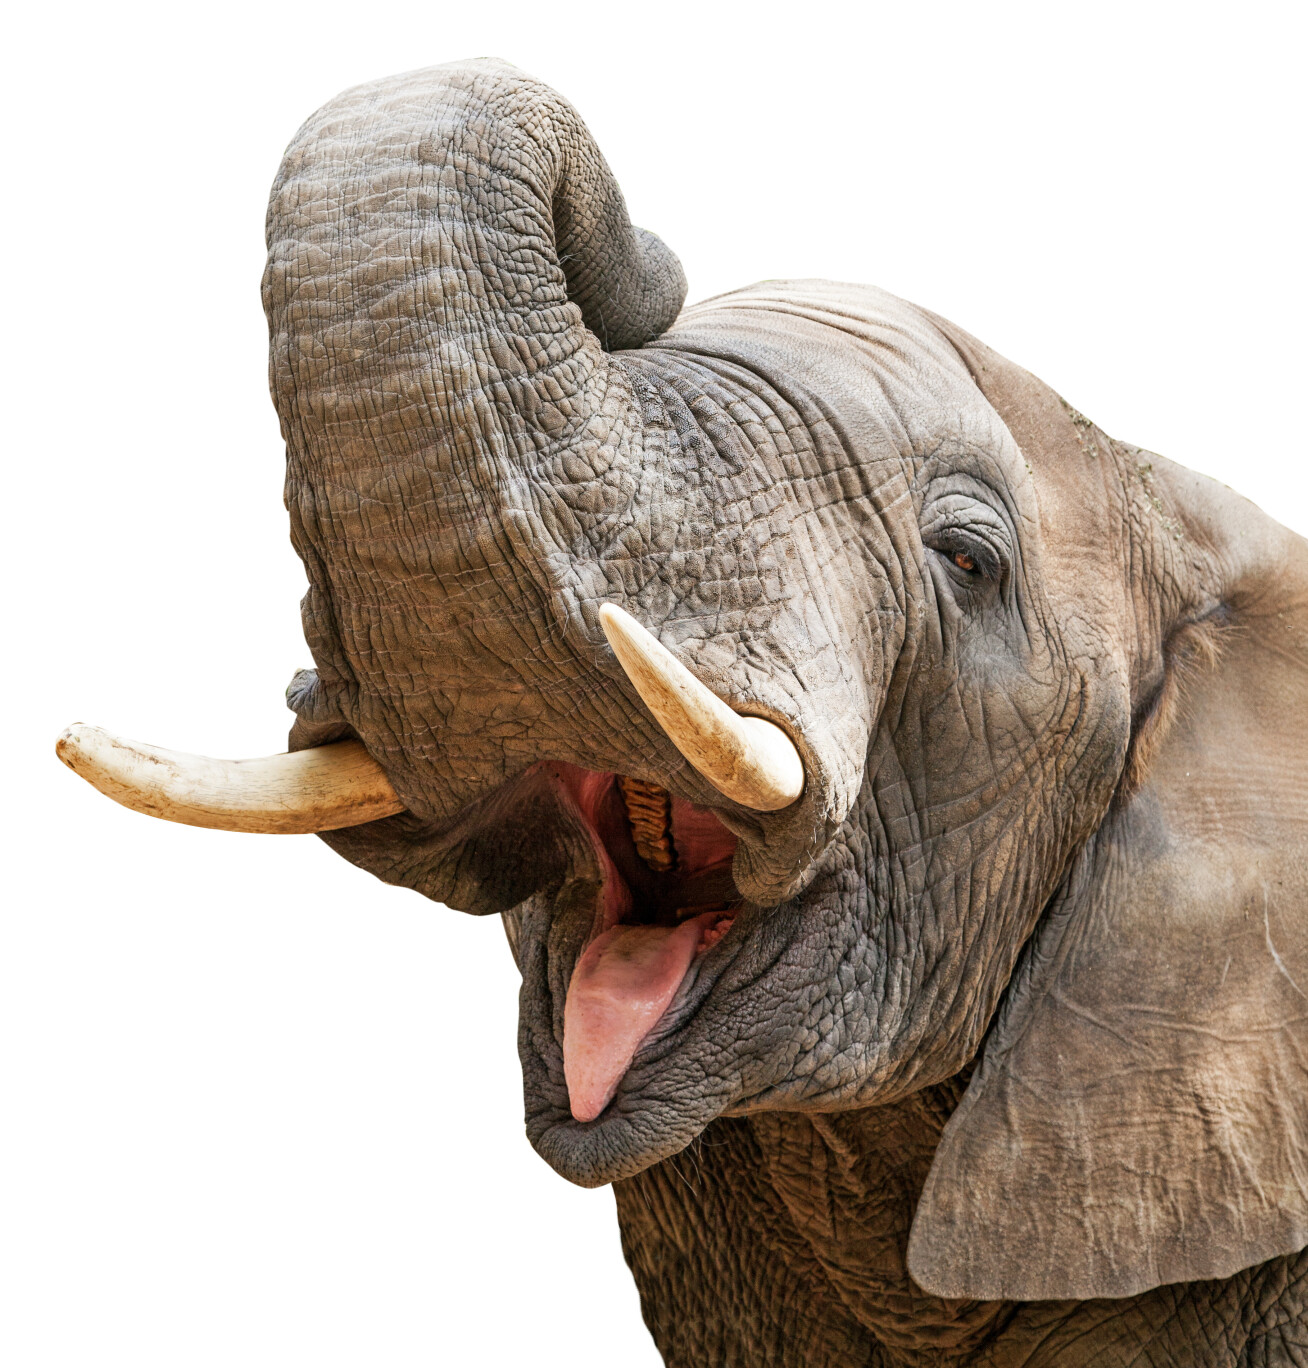 Close-up of elephant lifting its trunk, looking like it's smiling